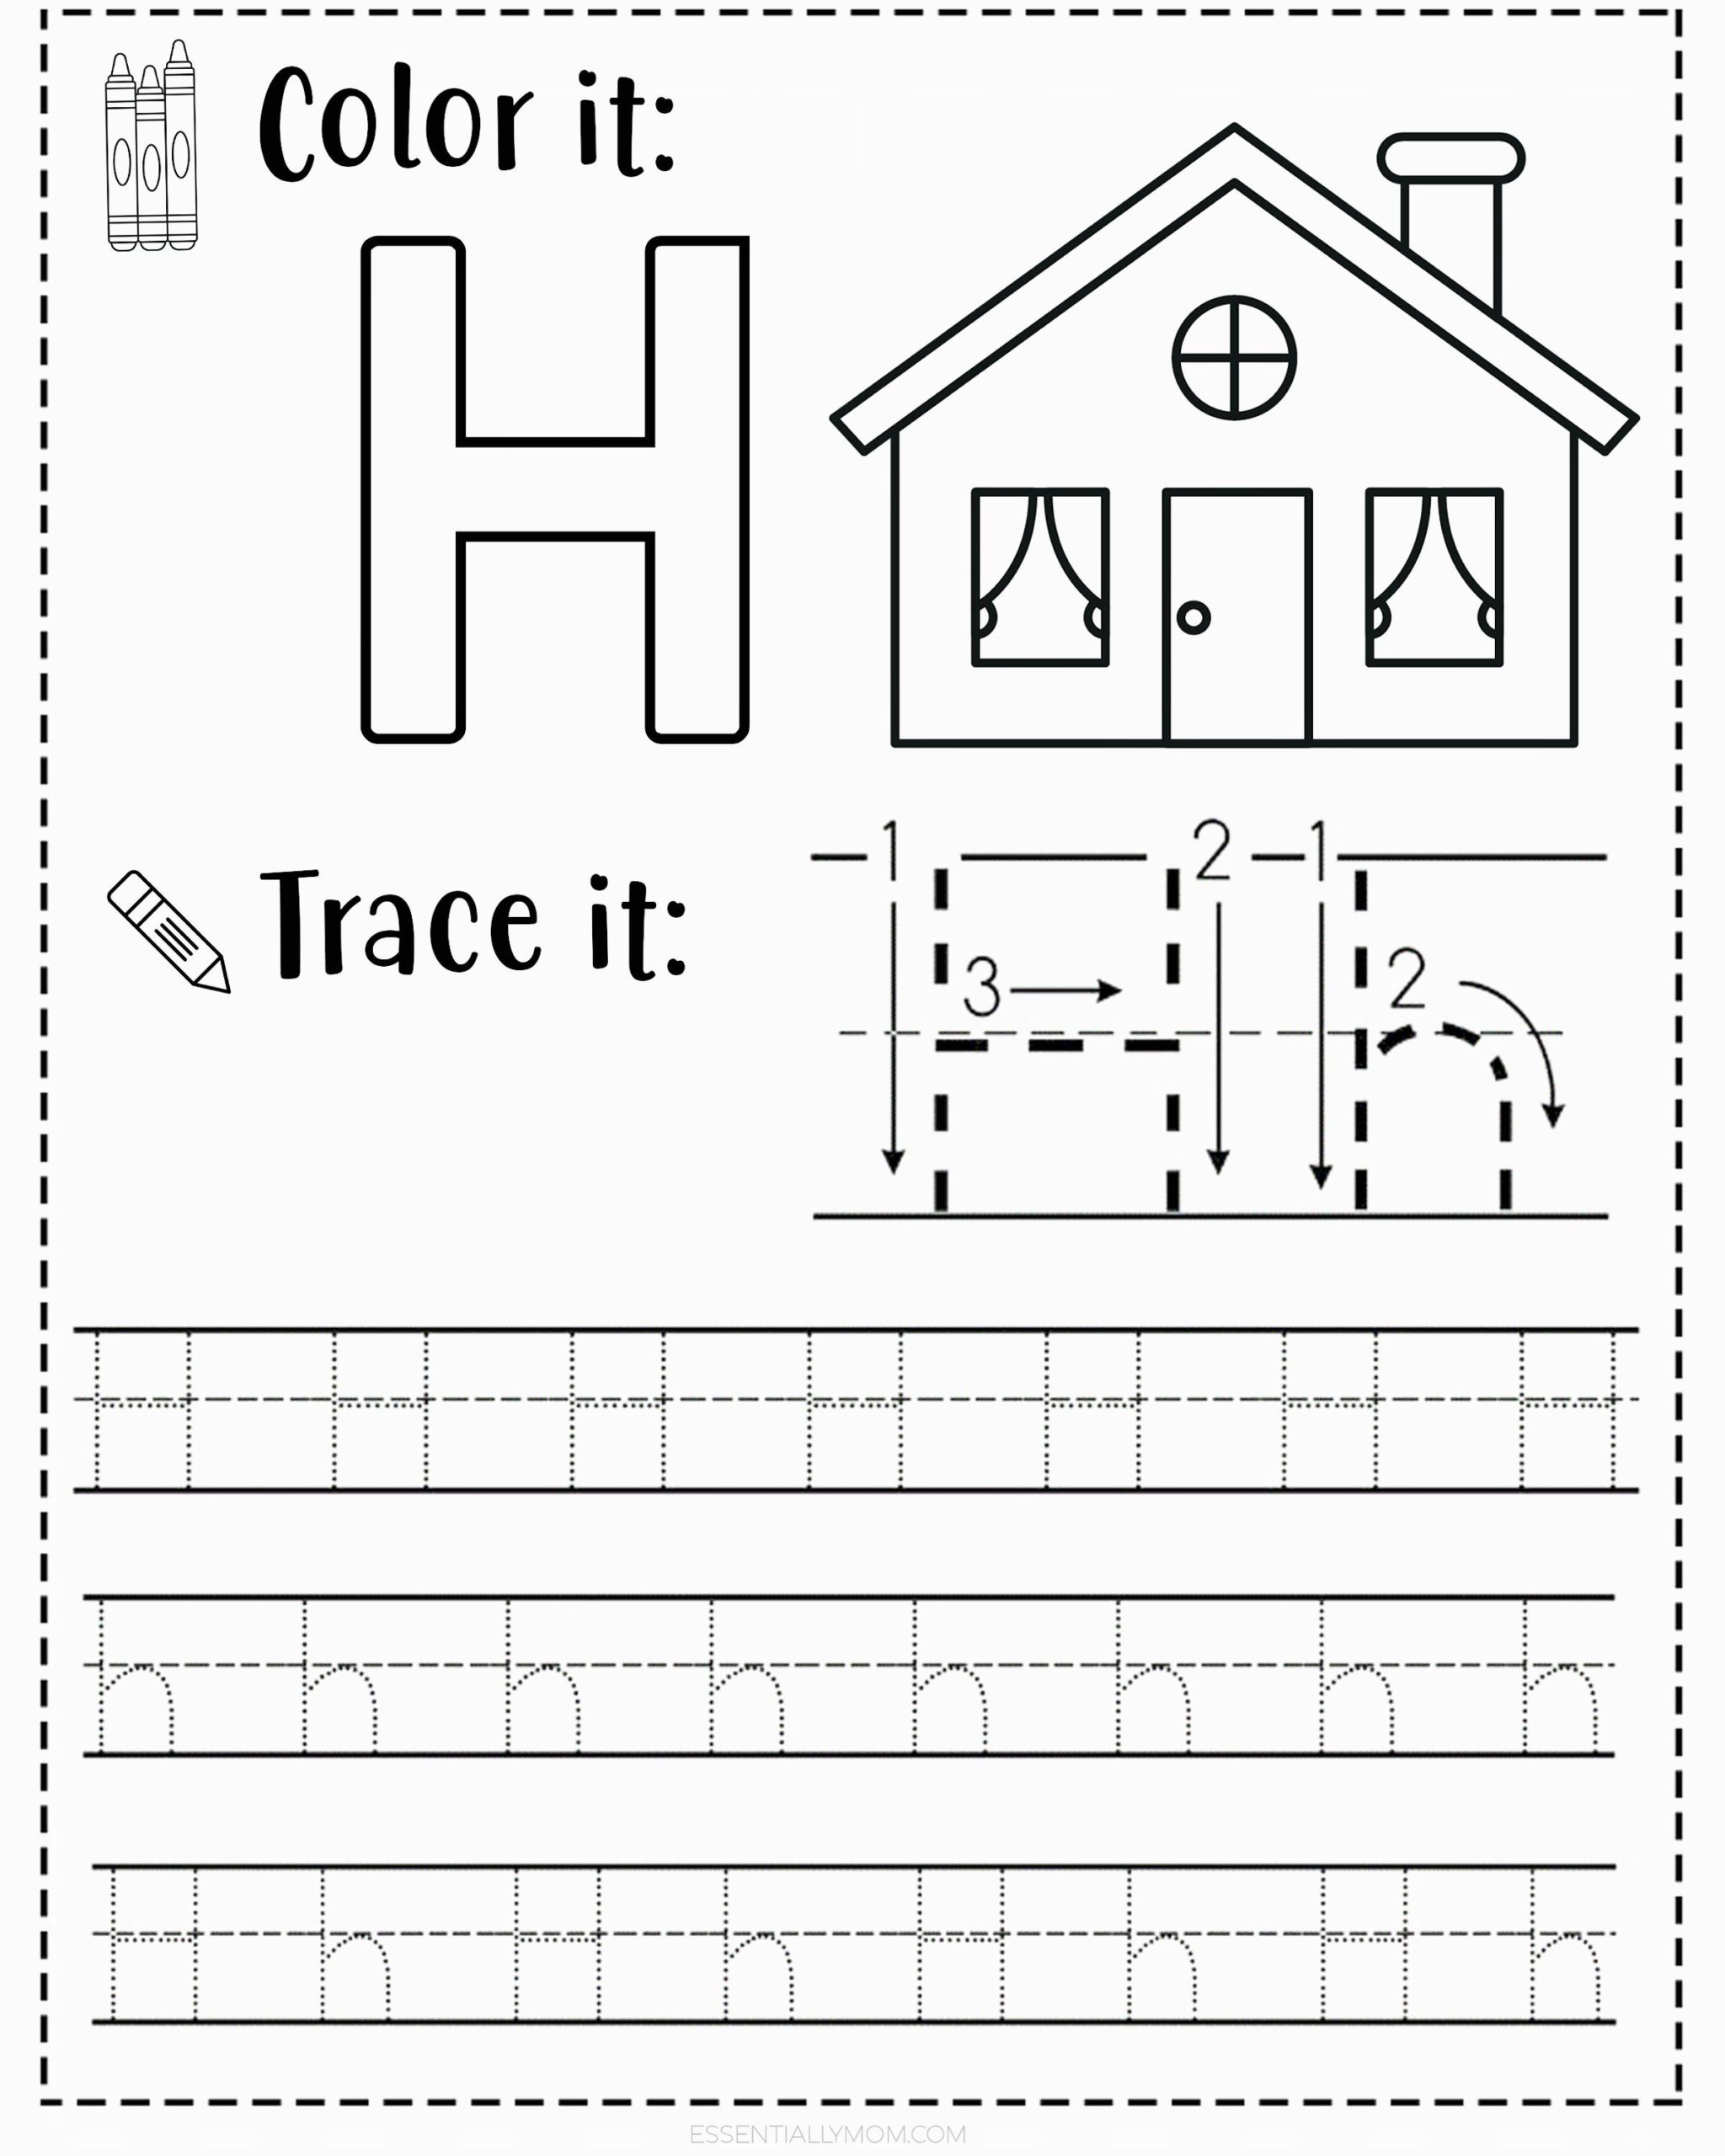 letter-a-worksheets-free-printables-printable-world-holiday